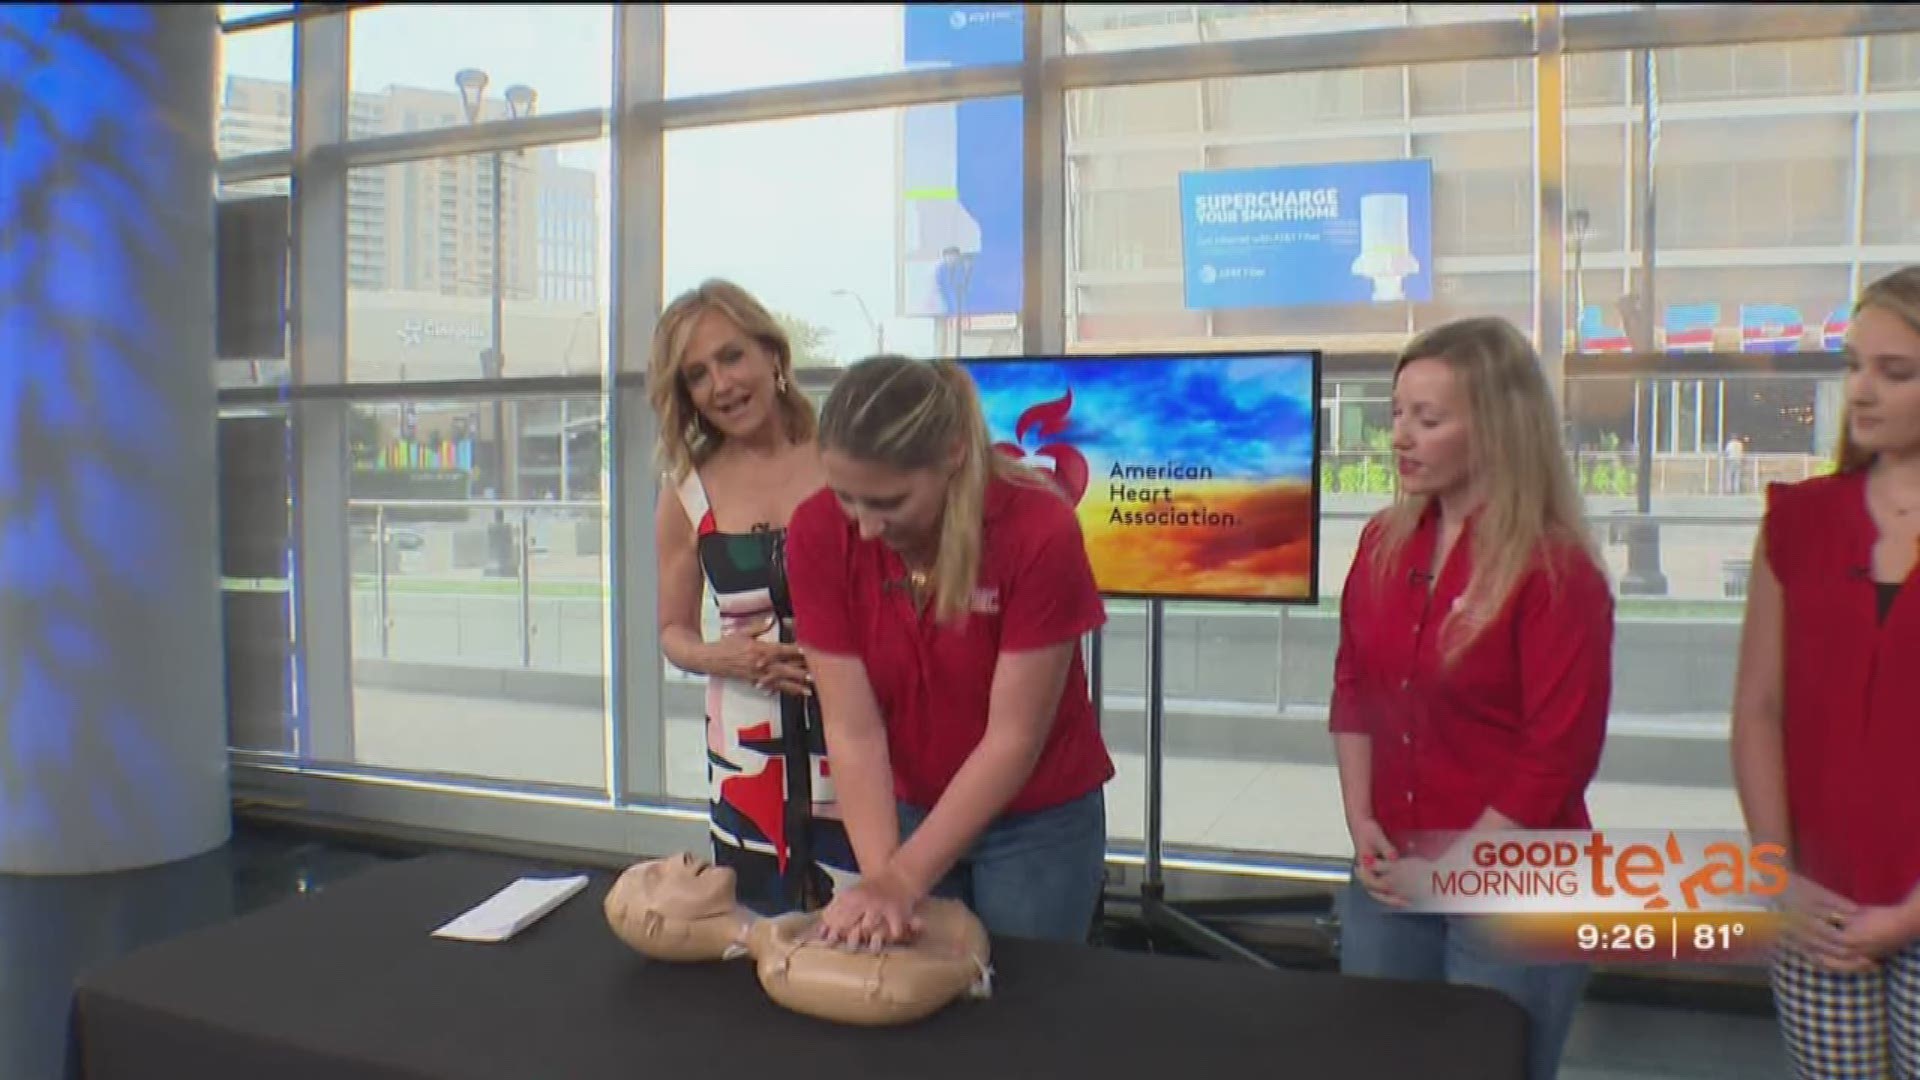 This week is National CPR and AED Awareness Week. Every second counts in cardiac arrest. Learn more from the American Heart Association at www.heart.org/handsonlycpr.        #cprsaveslives